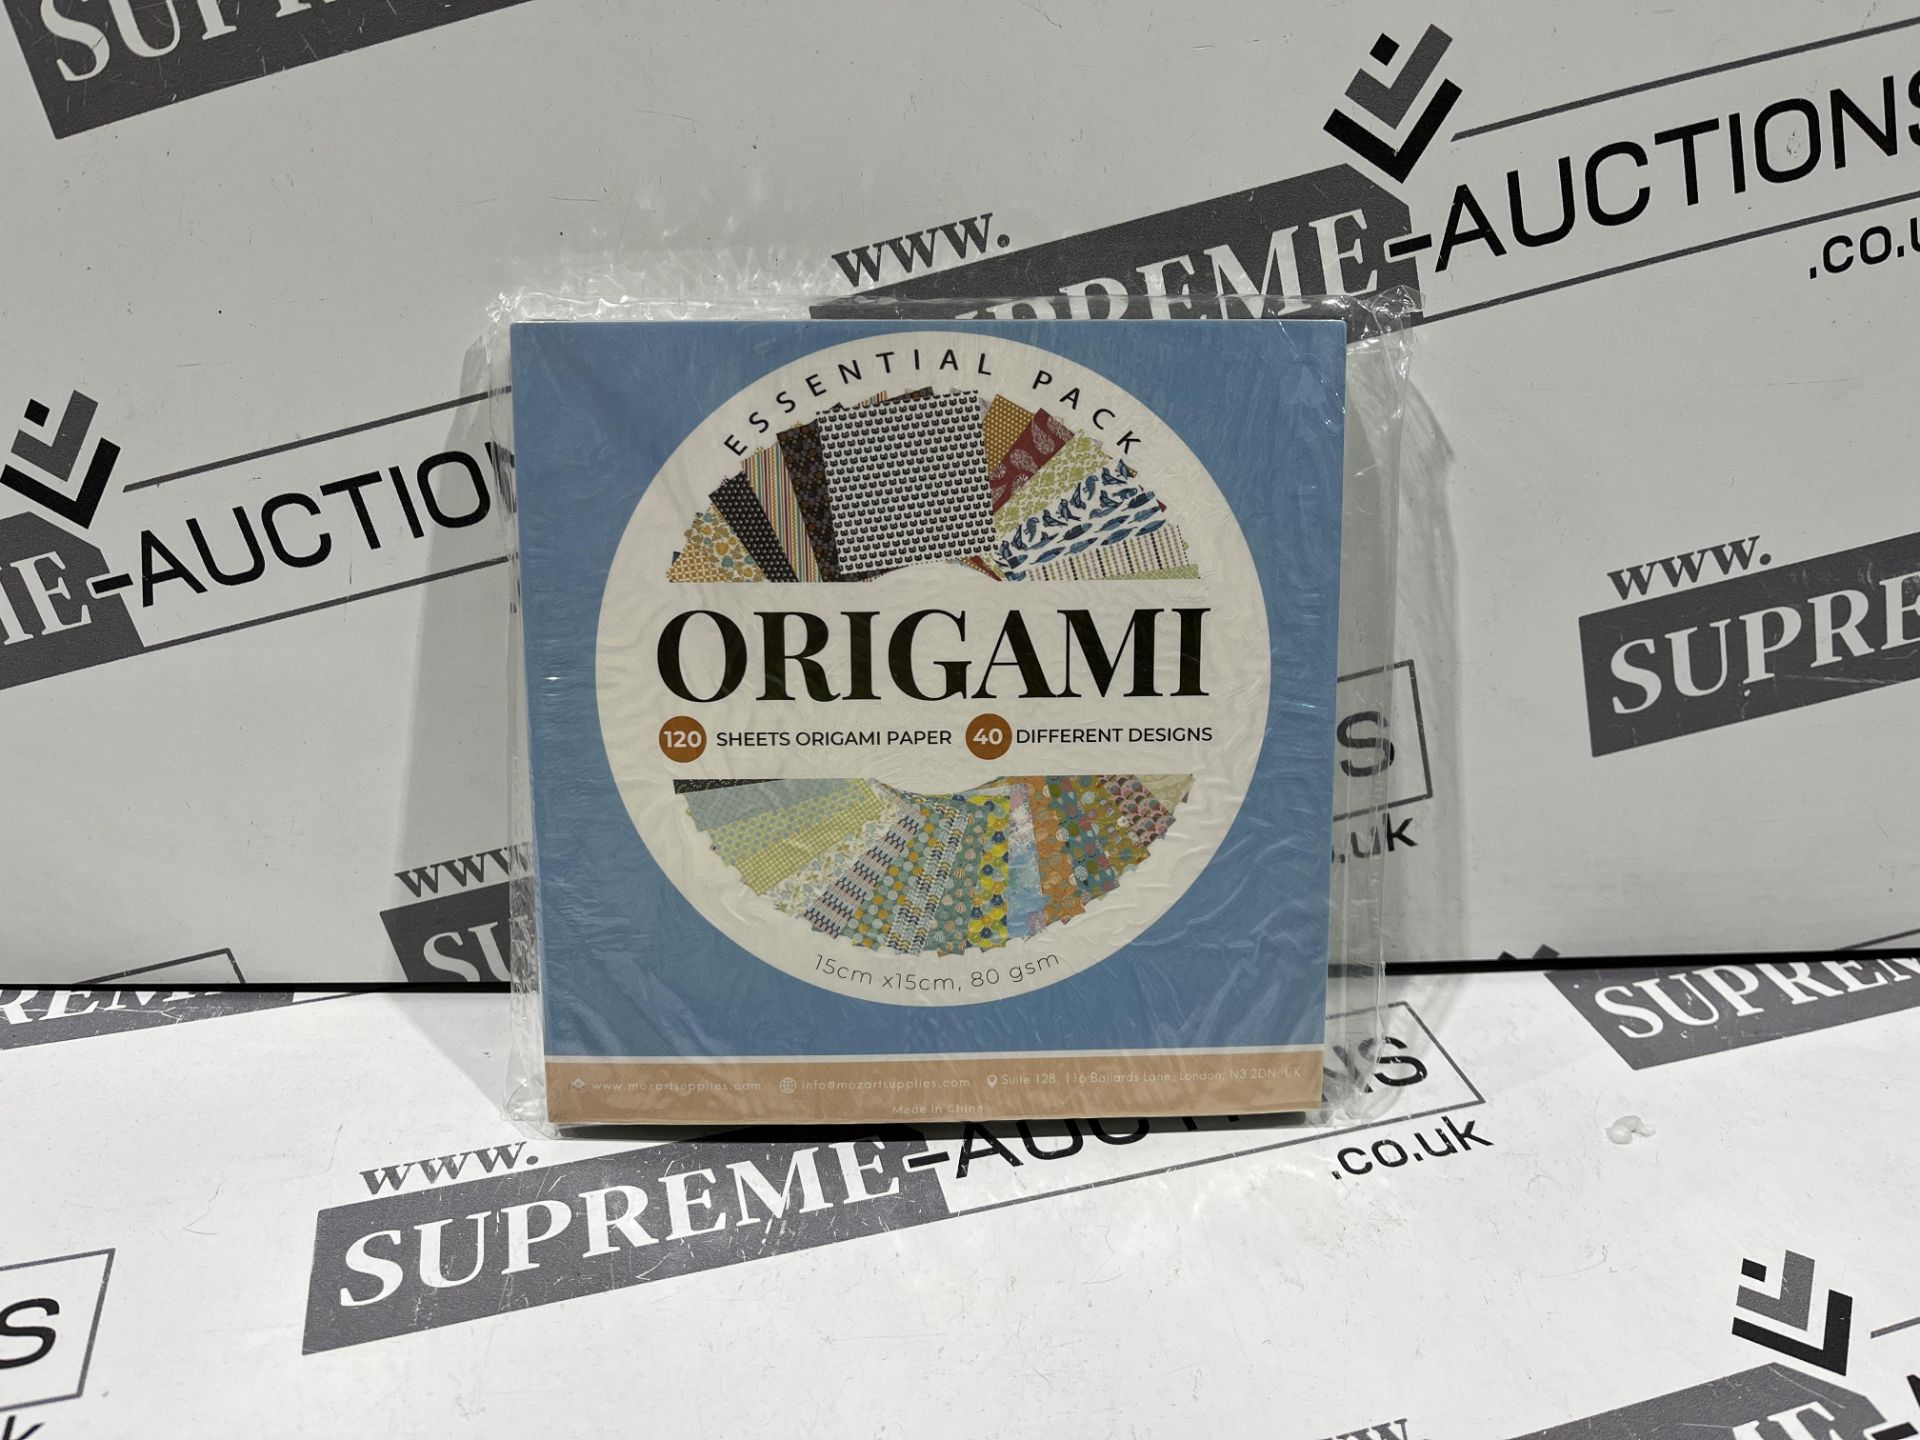 24 X BRAND NEW ORIGAMI PAPER SETS 120 SHEETS ASSORTED OF TRADITIONAL ORIGAMI FOLDING PAPER RRP £25